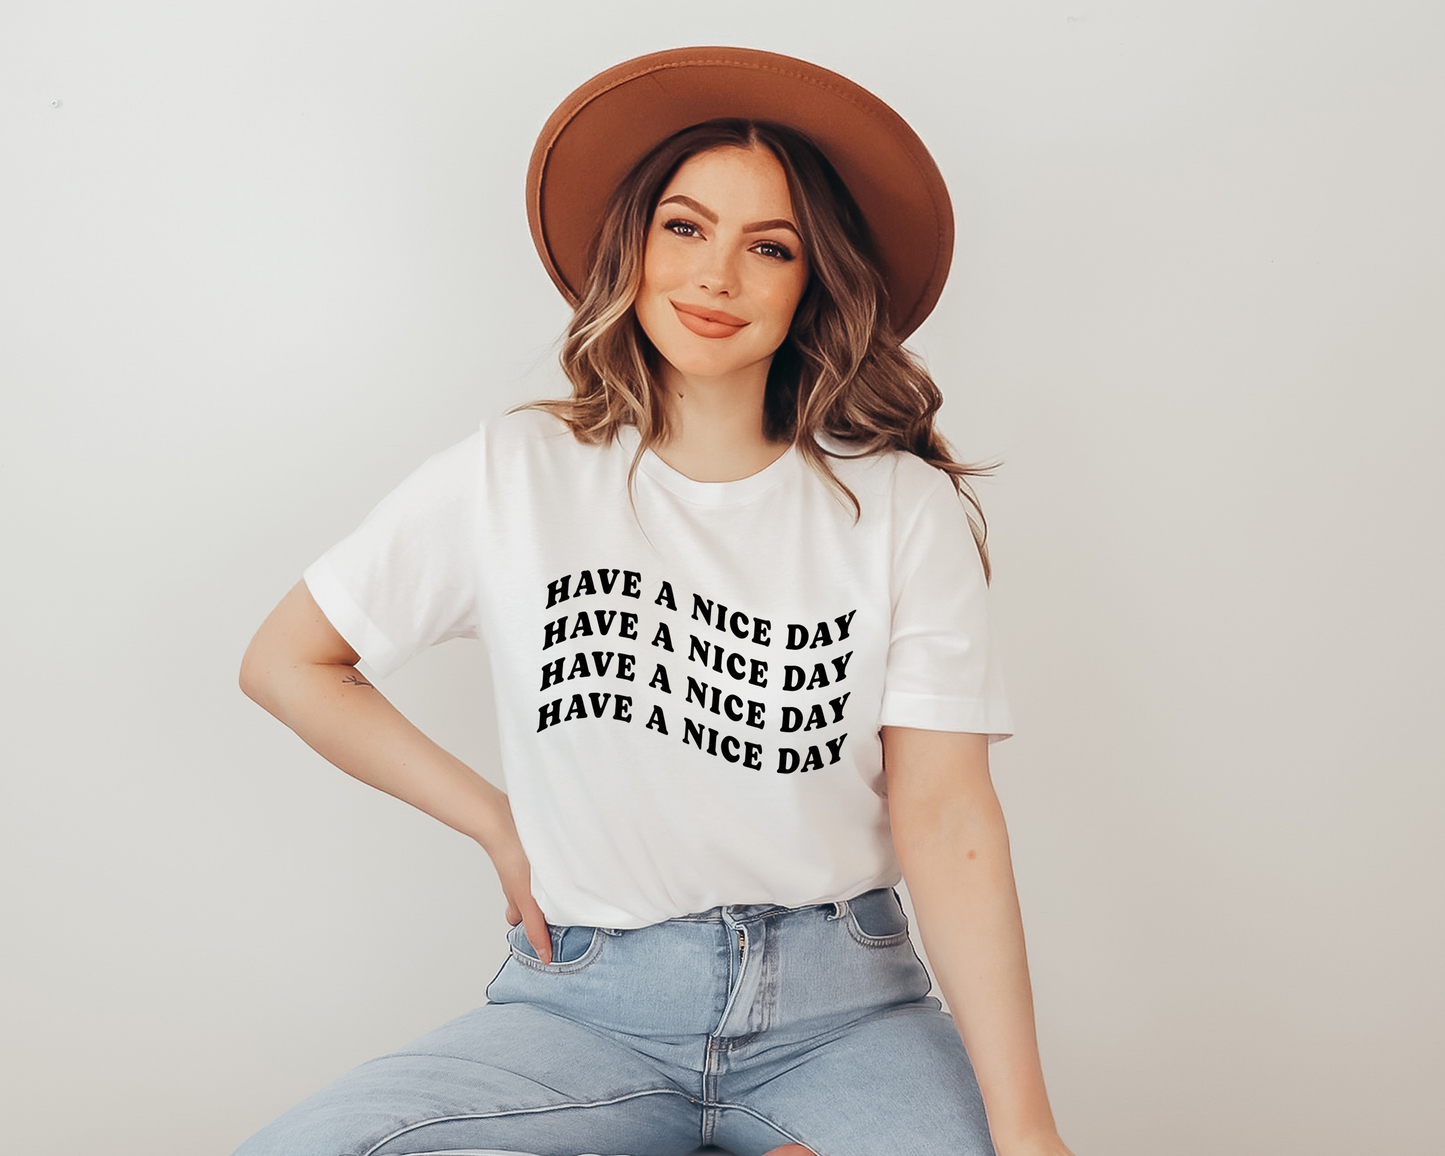 Have A Nice DayGraphic T-Shirt